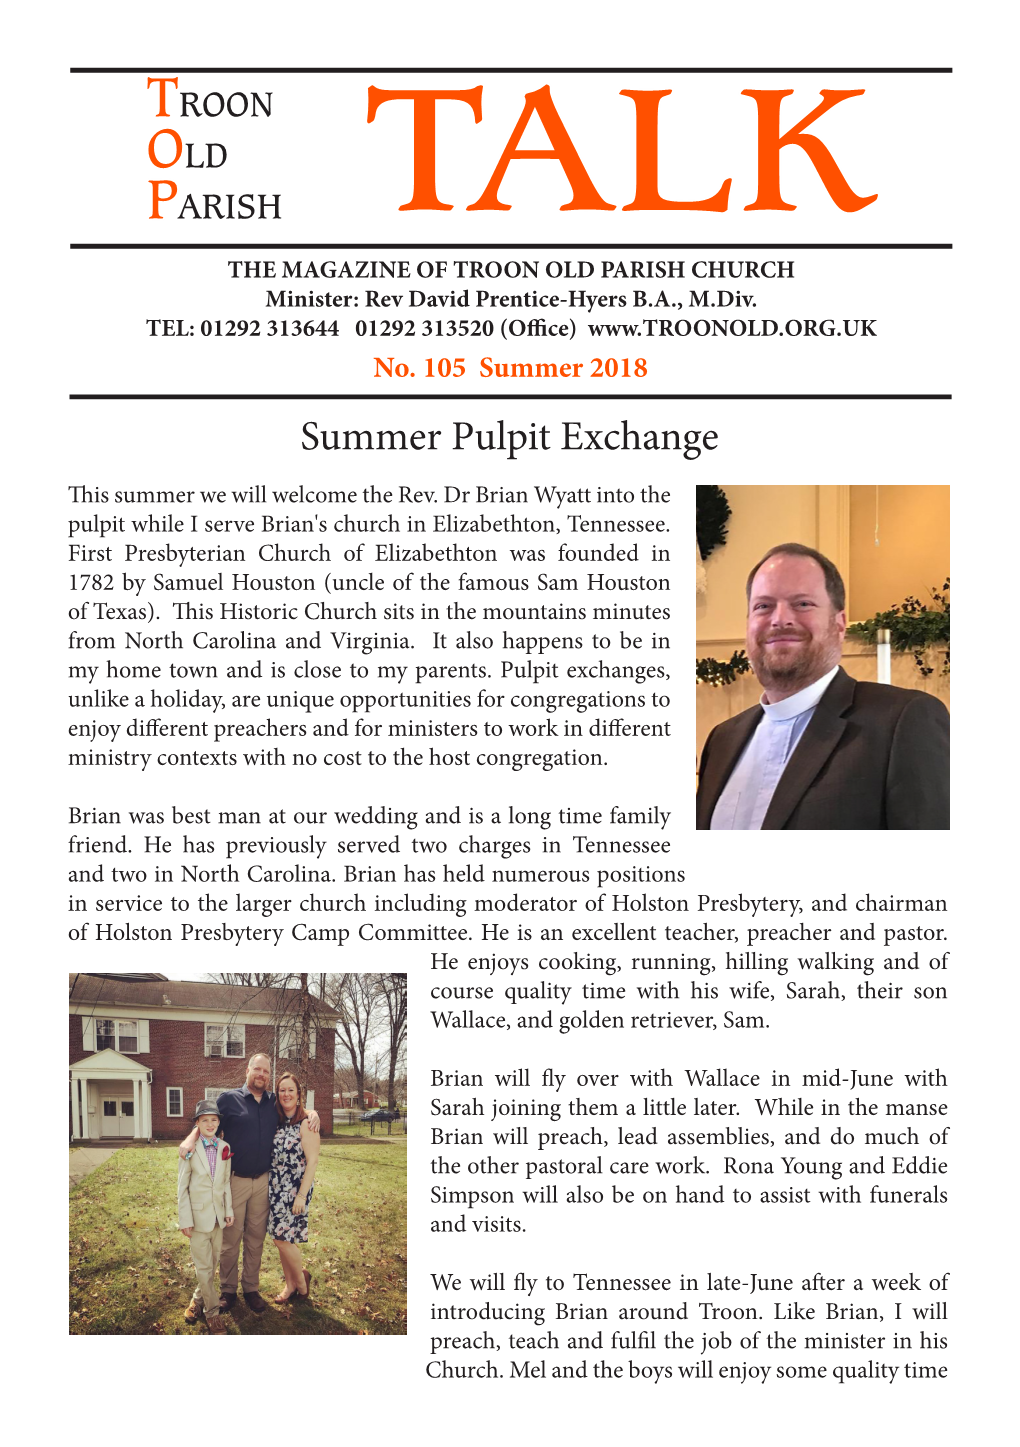 Summer Pulpit Exchange This Summer We Will Welcome the Rev